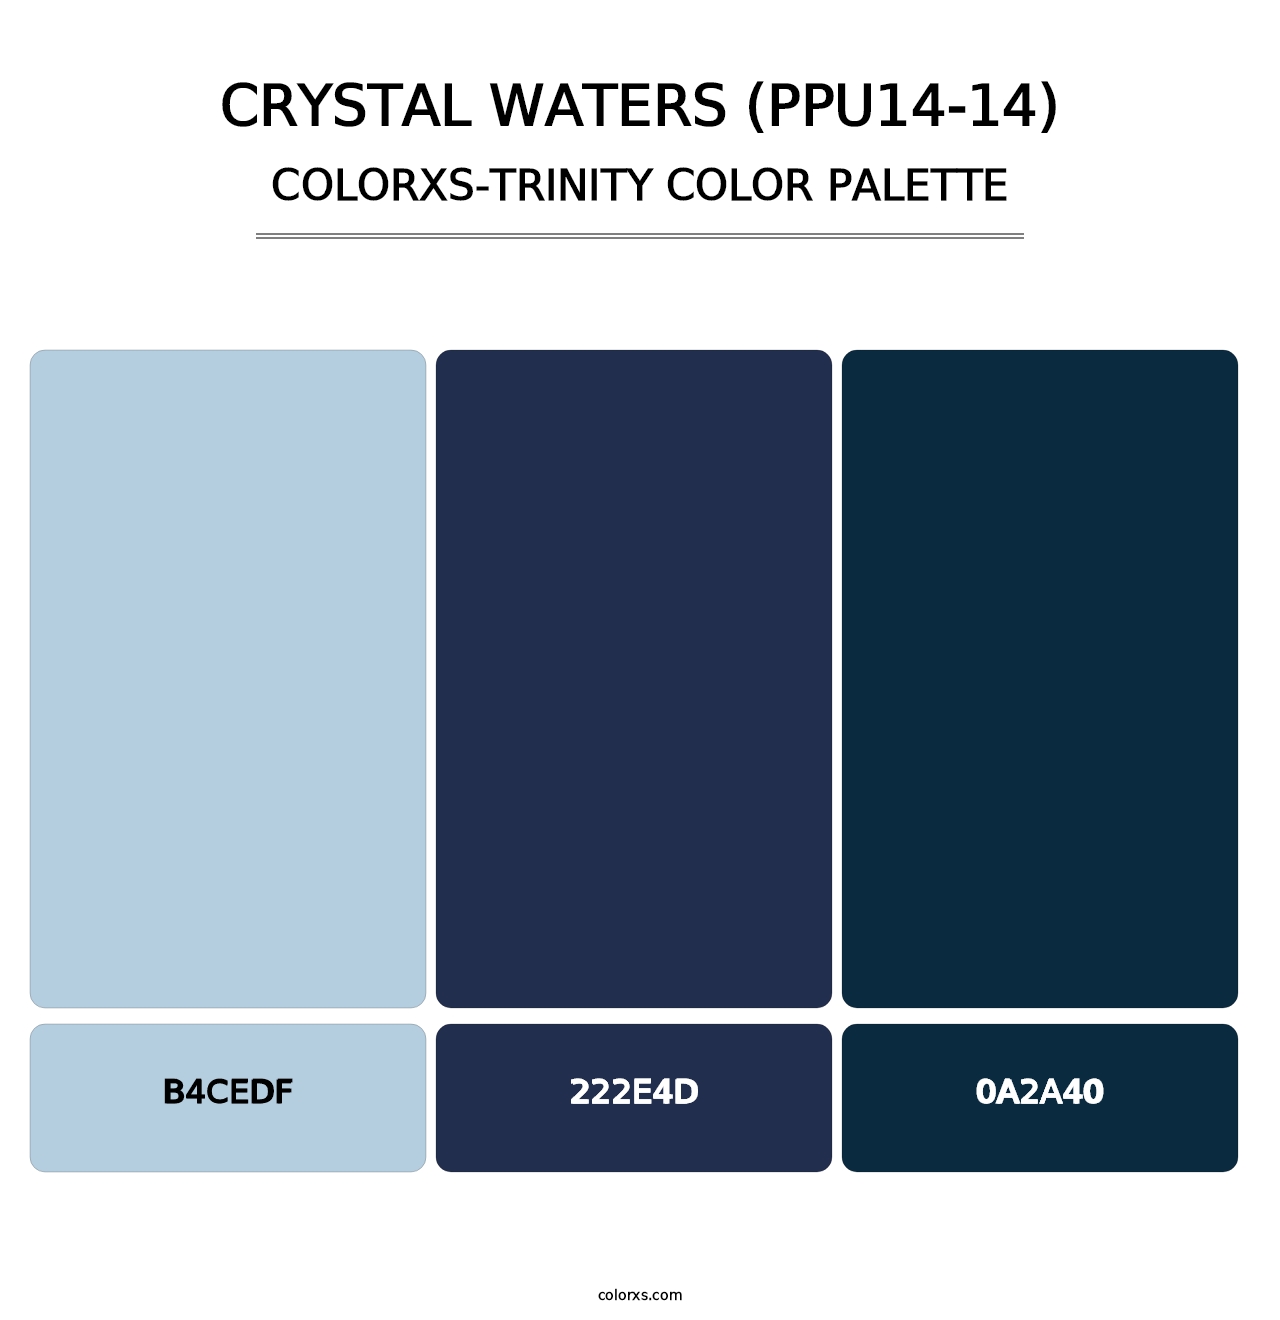 Crystal Waters (PPU14-14) - Colorxs Trinity Palette